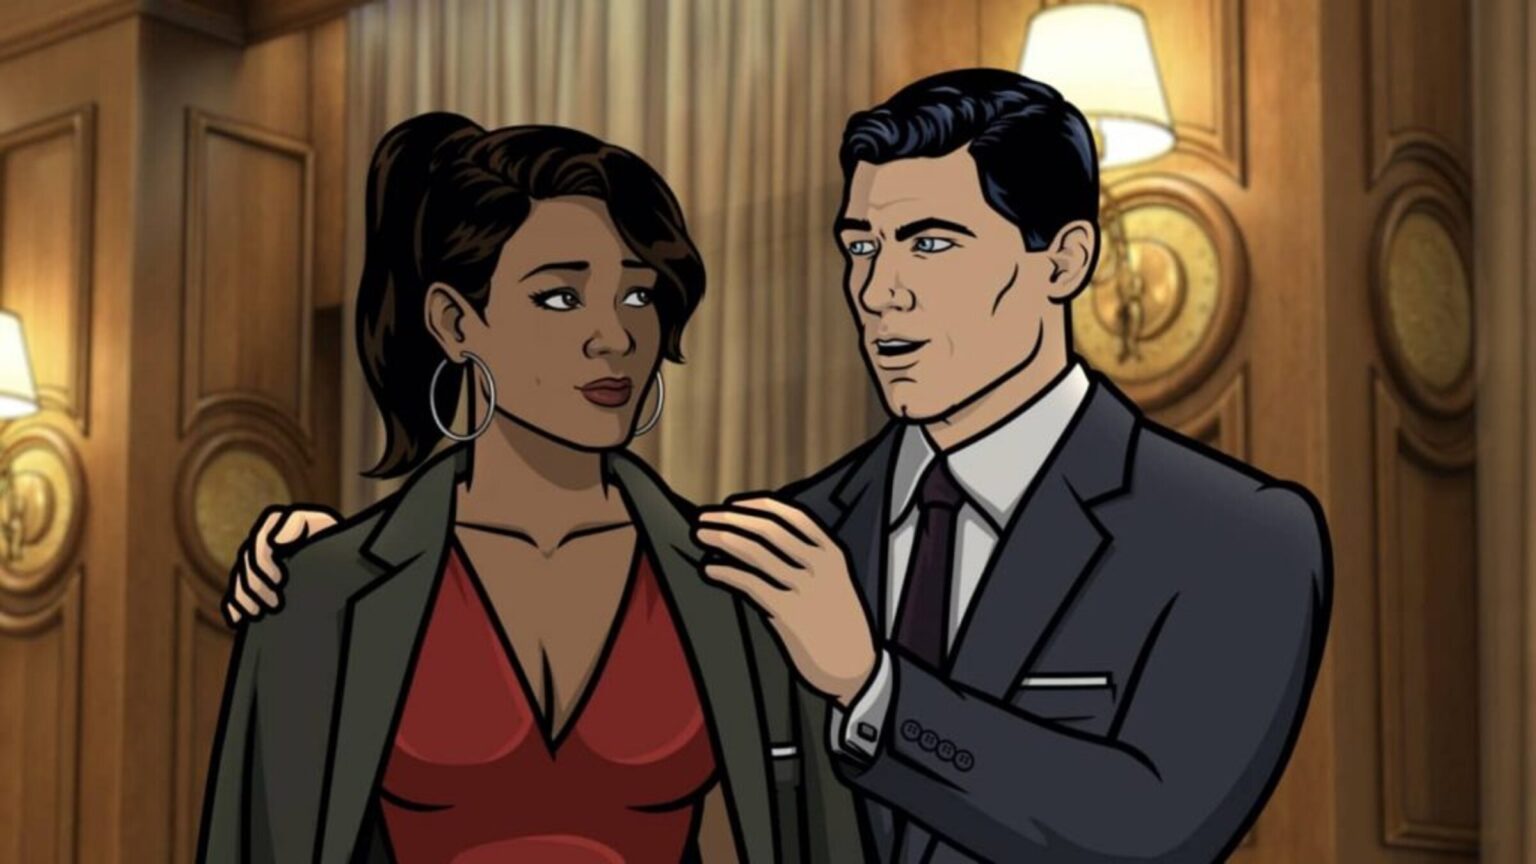 We’re going to take a brief look at Archer & Lana’s relationship, then give you some insight on what we know so far. Take a journey back in time with us.